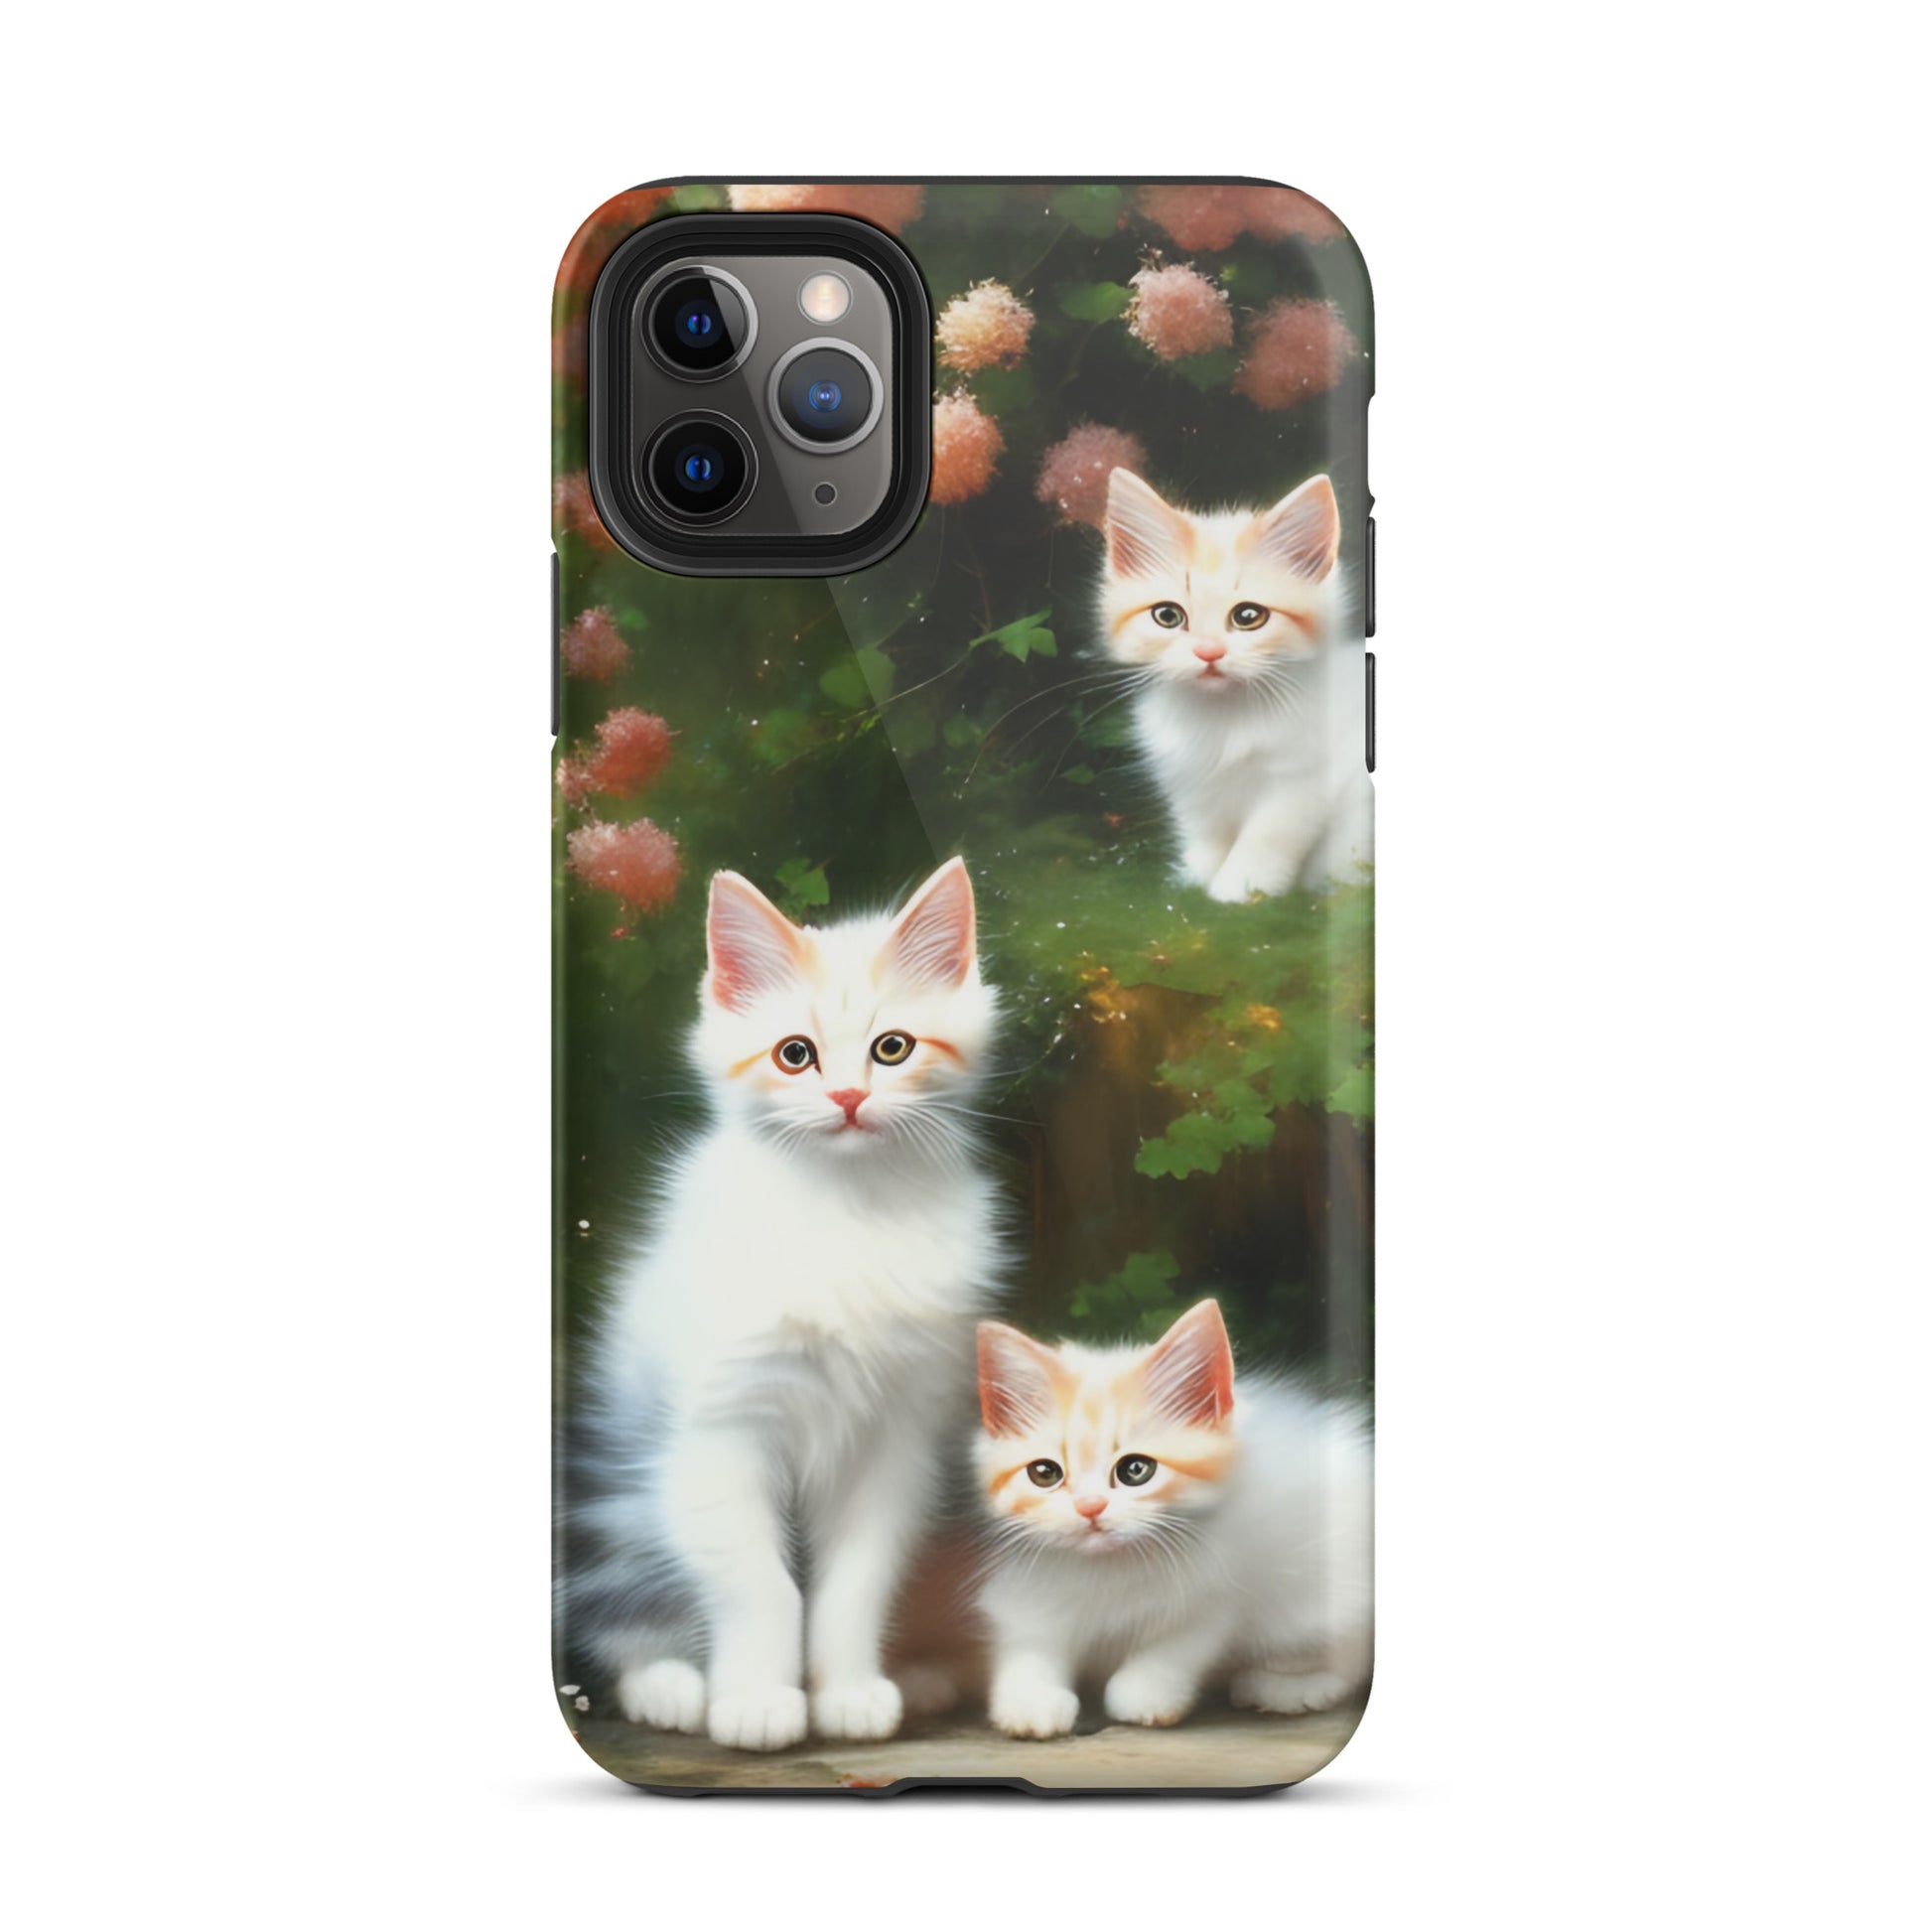 A picture of a iphone tough case with 3 fluffy white and orange kittens and peach colored flowers in the background - glossy-iphone-11-pro-max-front